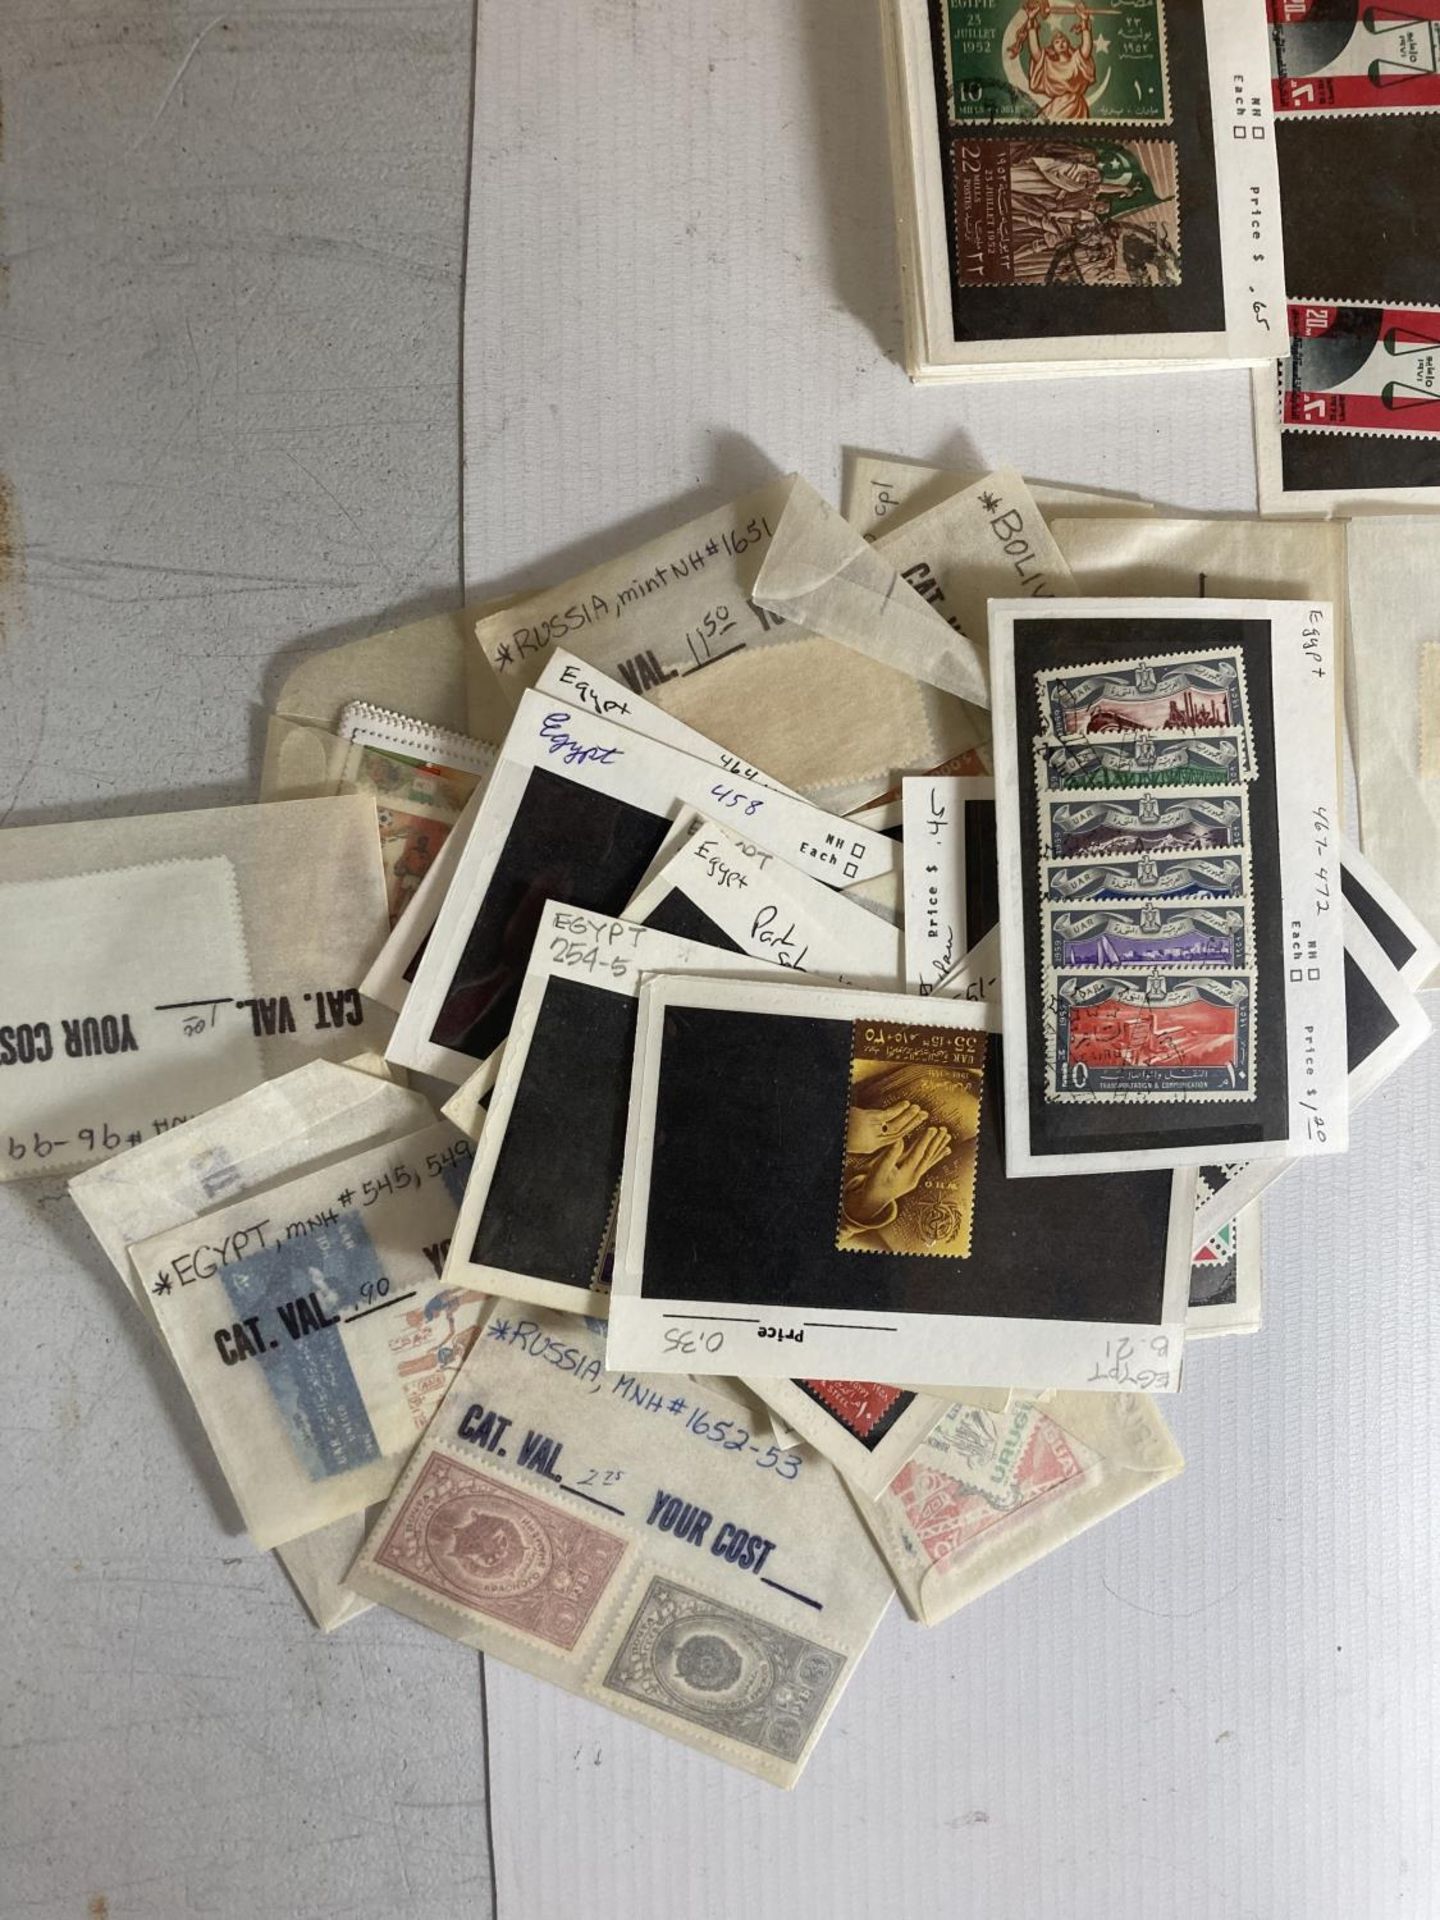 A MIXED LOT OF STAMPS TO INCLUDE EGYPT, POLAND INDONESIA, AFGHANISTAN, RUSSIA, MAURITANIA ETC MANY - Image 5 of 7